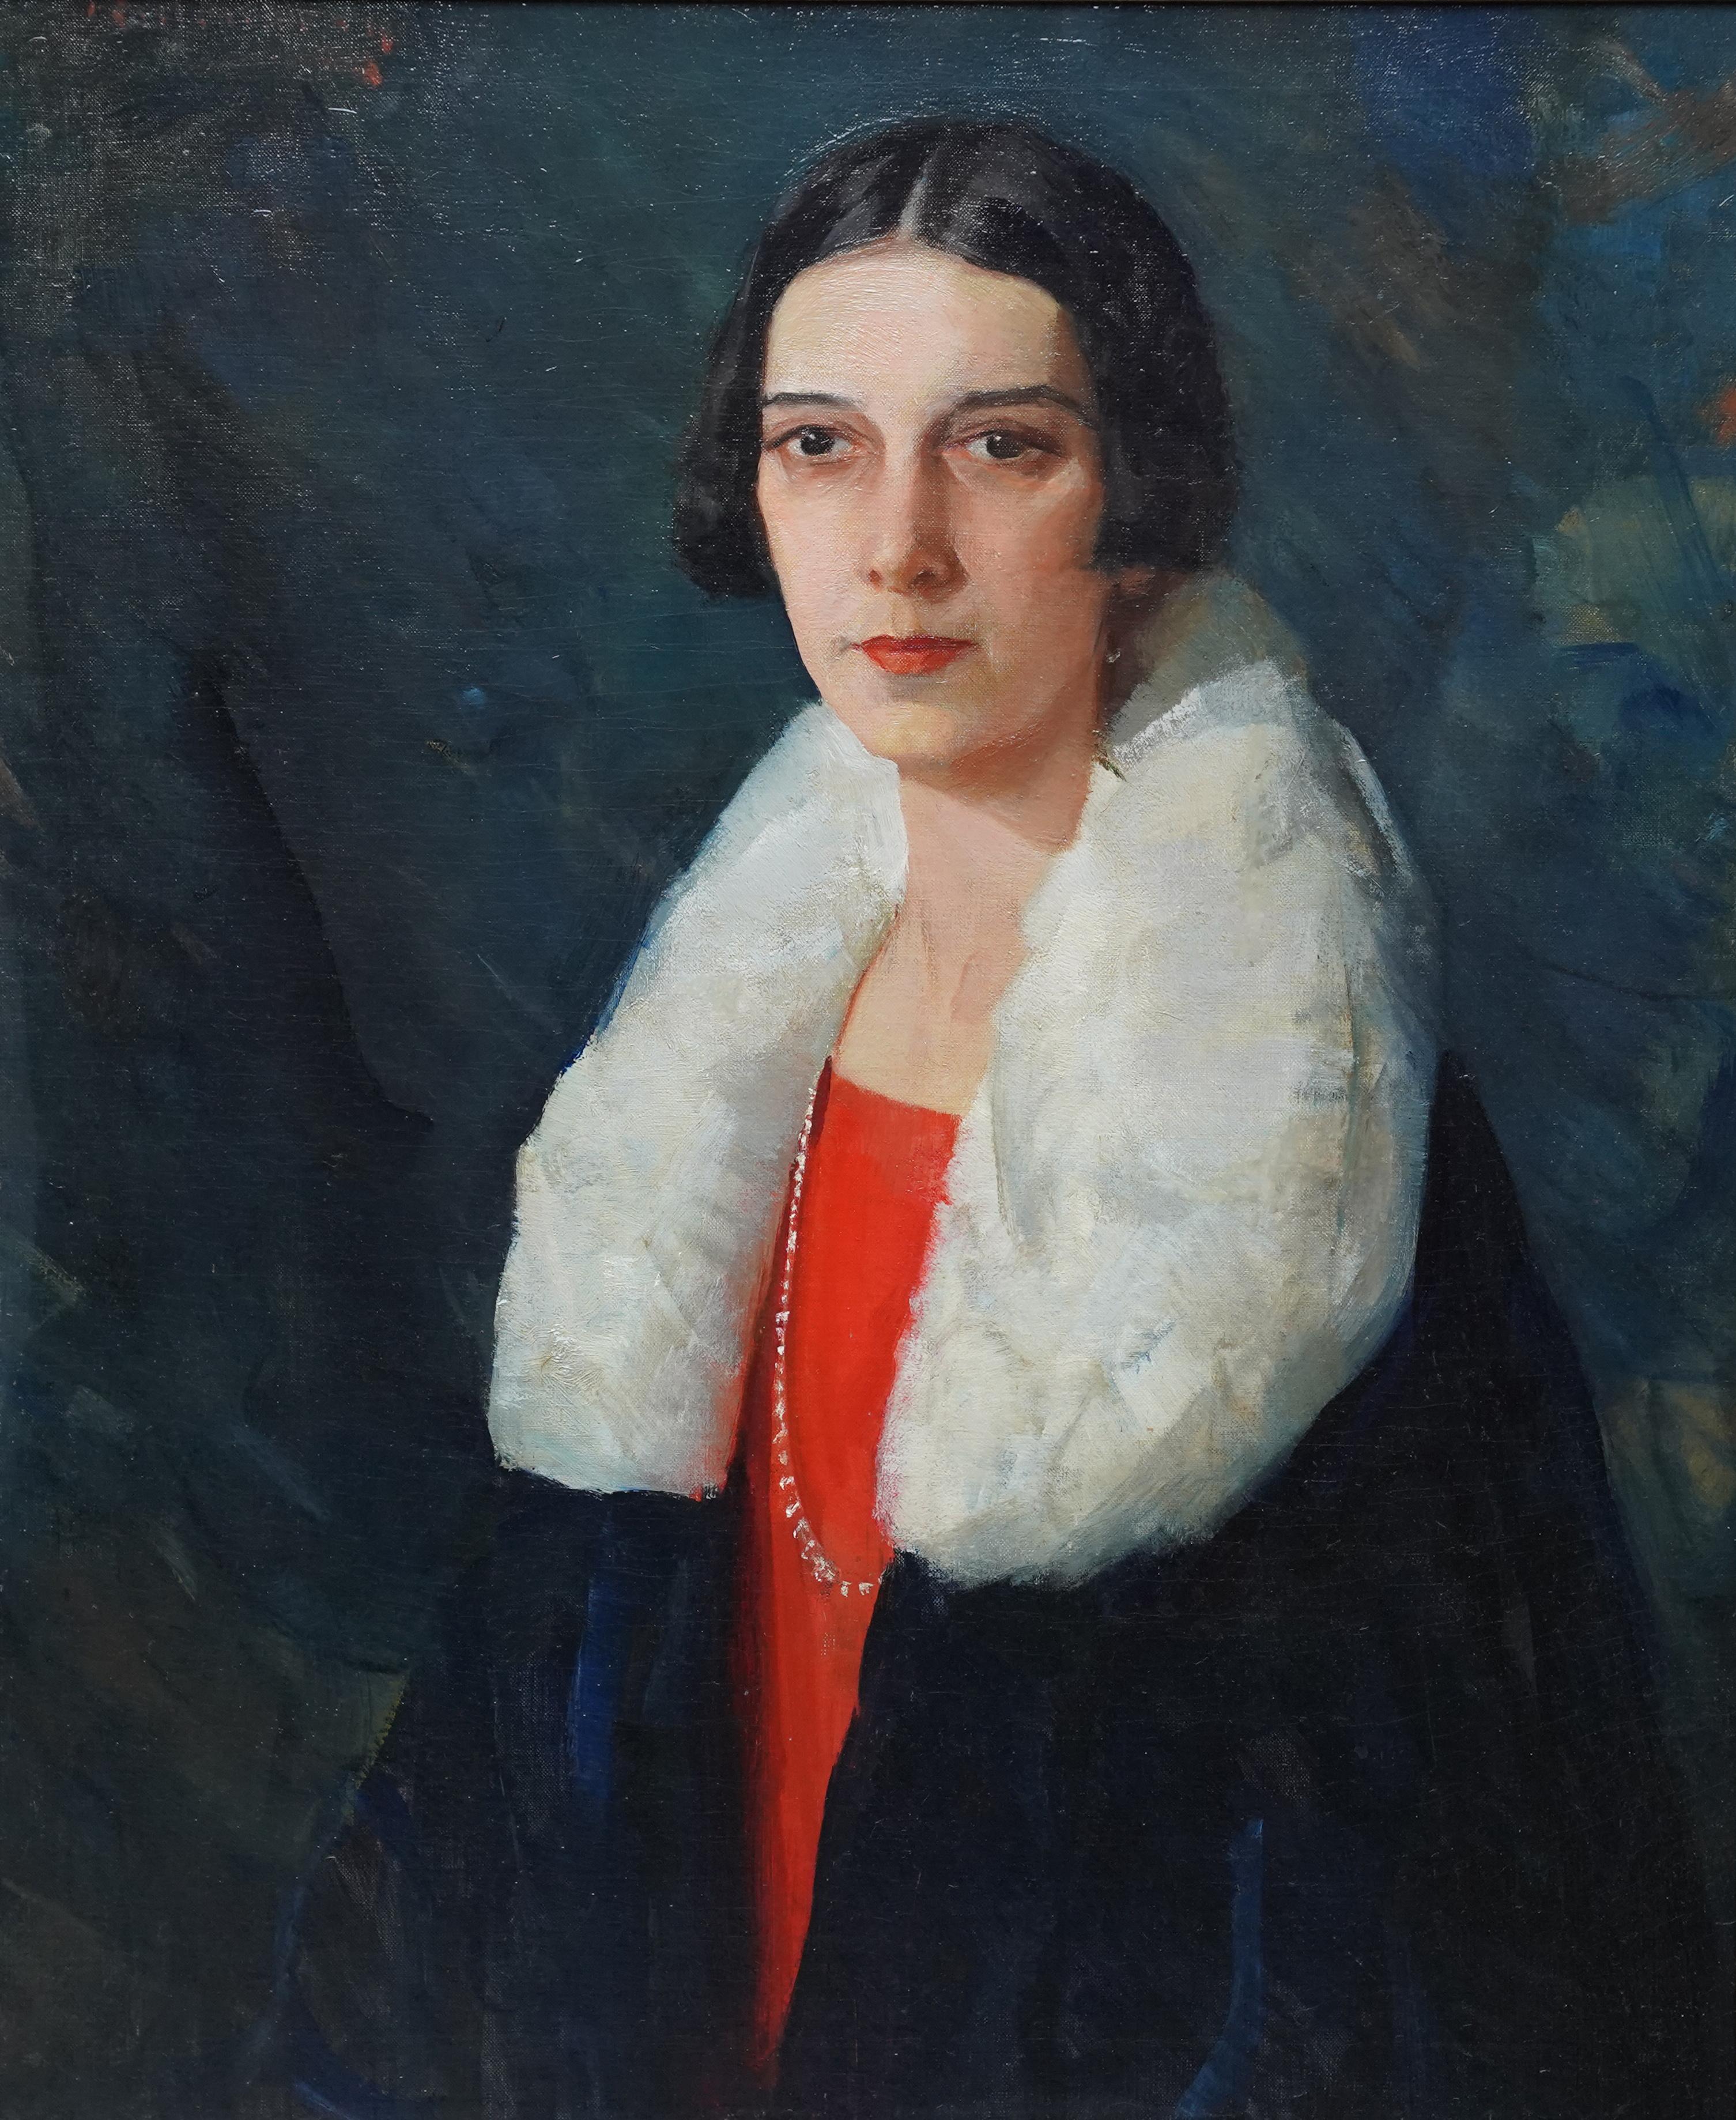 Portrait of a 1920's Lady - American Art Deco female portrait oil painting - Painting by Henry R Rittenberg